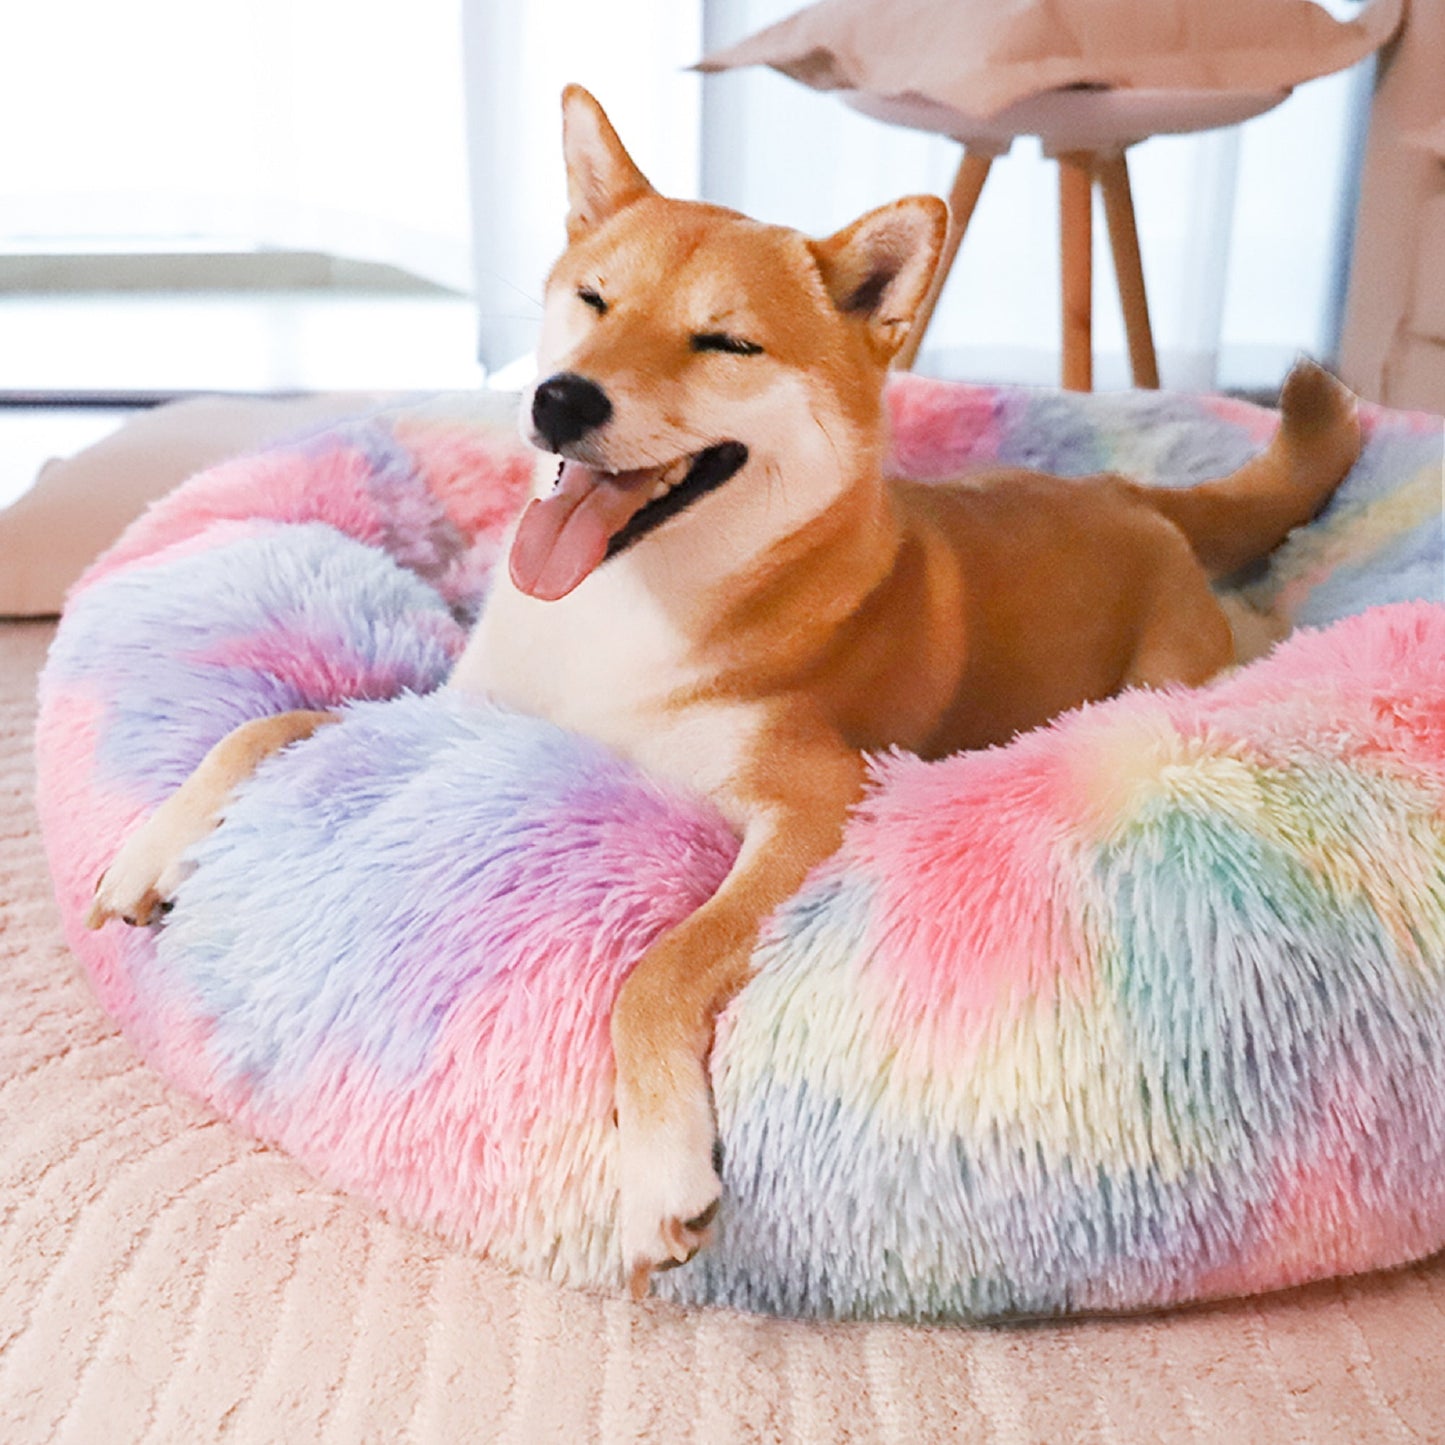 Calming Donut Dog Bed Cat Bed for Small Medium Large Dogs And Cats Anti-Anxiety Plush Soft and Cozy Cat Bed Warming Pet Bed for Winter and Fall (24 IN, Mixed Rainbow)